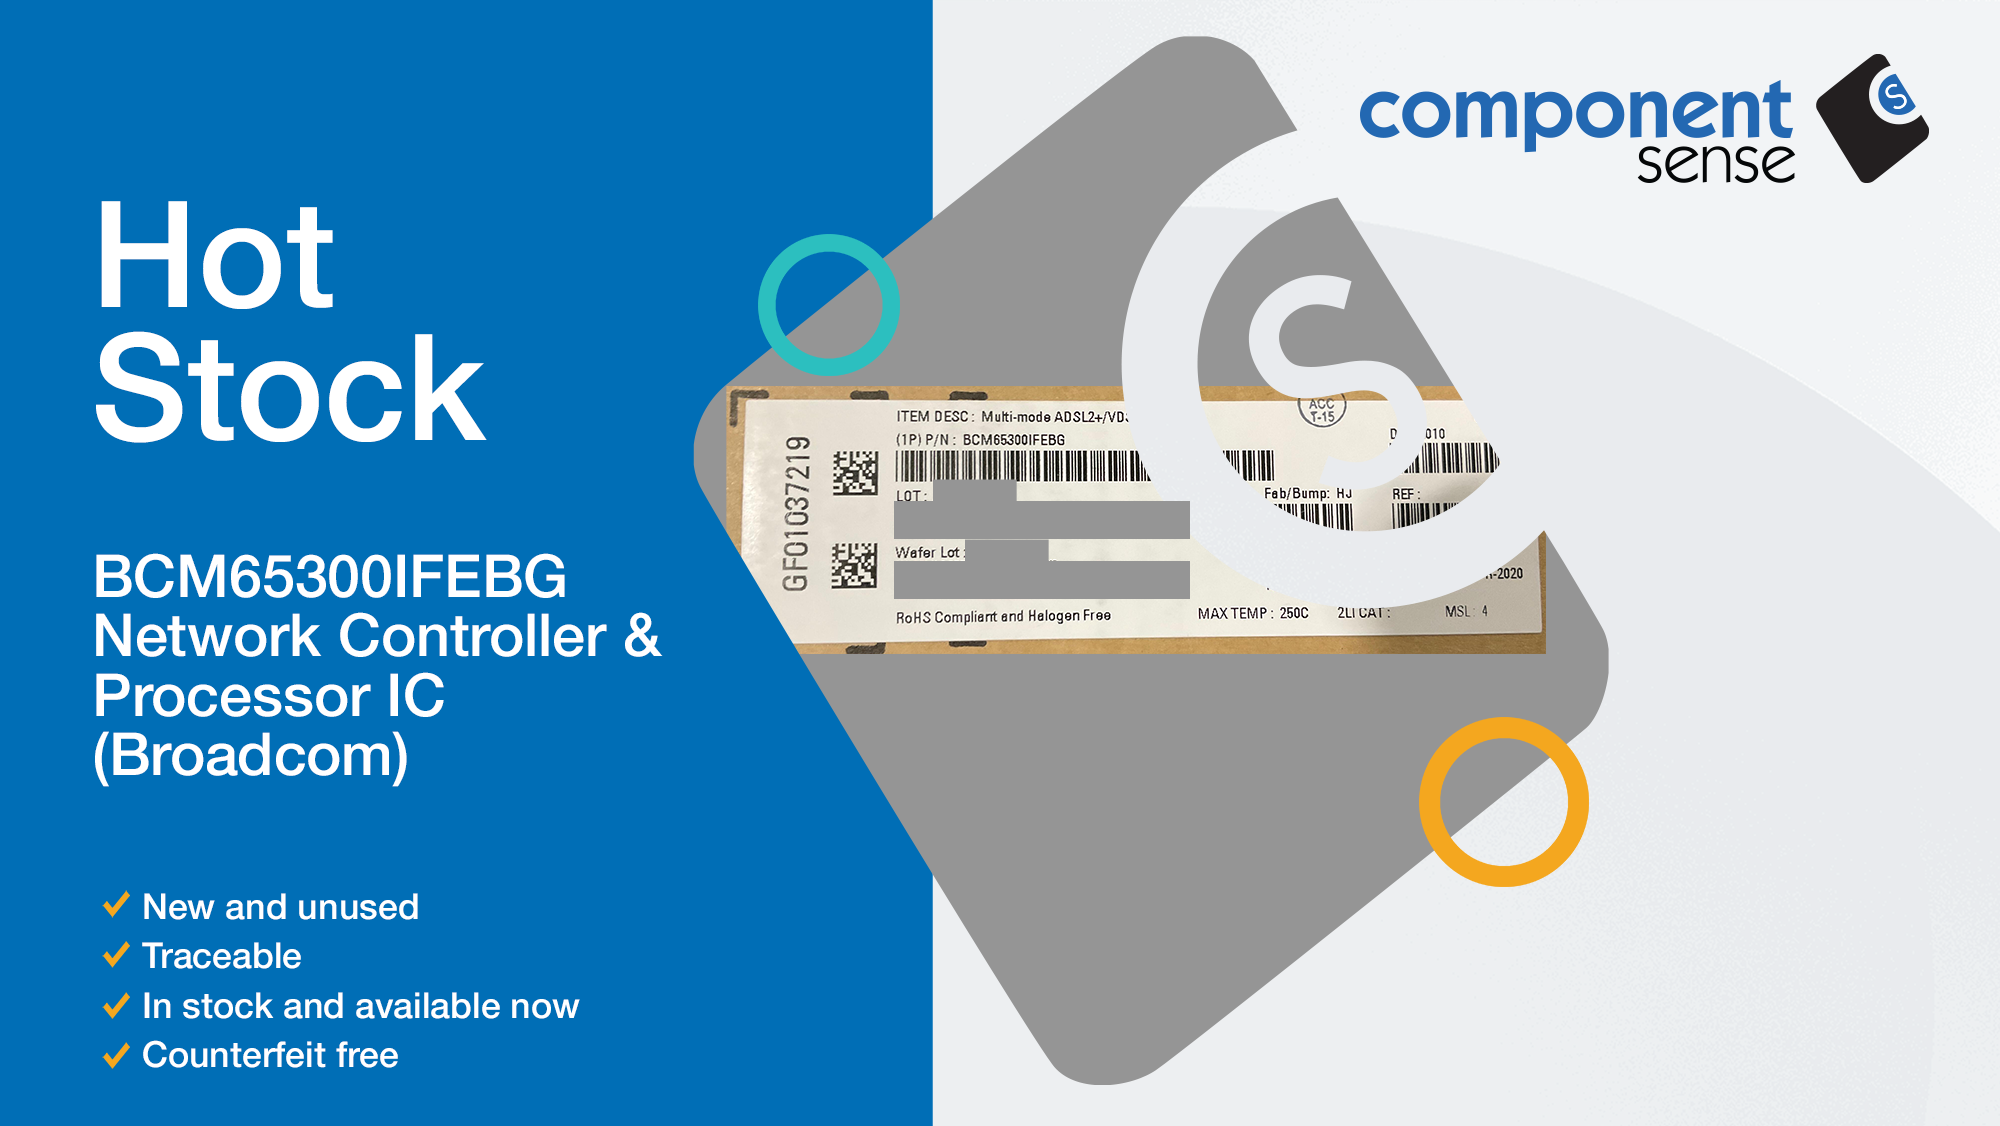 Blog banner featuring the BCM65300IFEBG and Component Sense branding